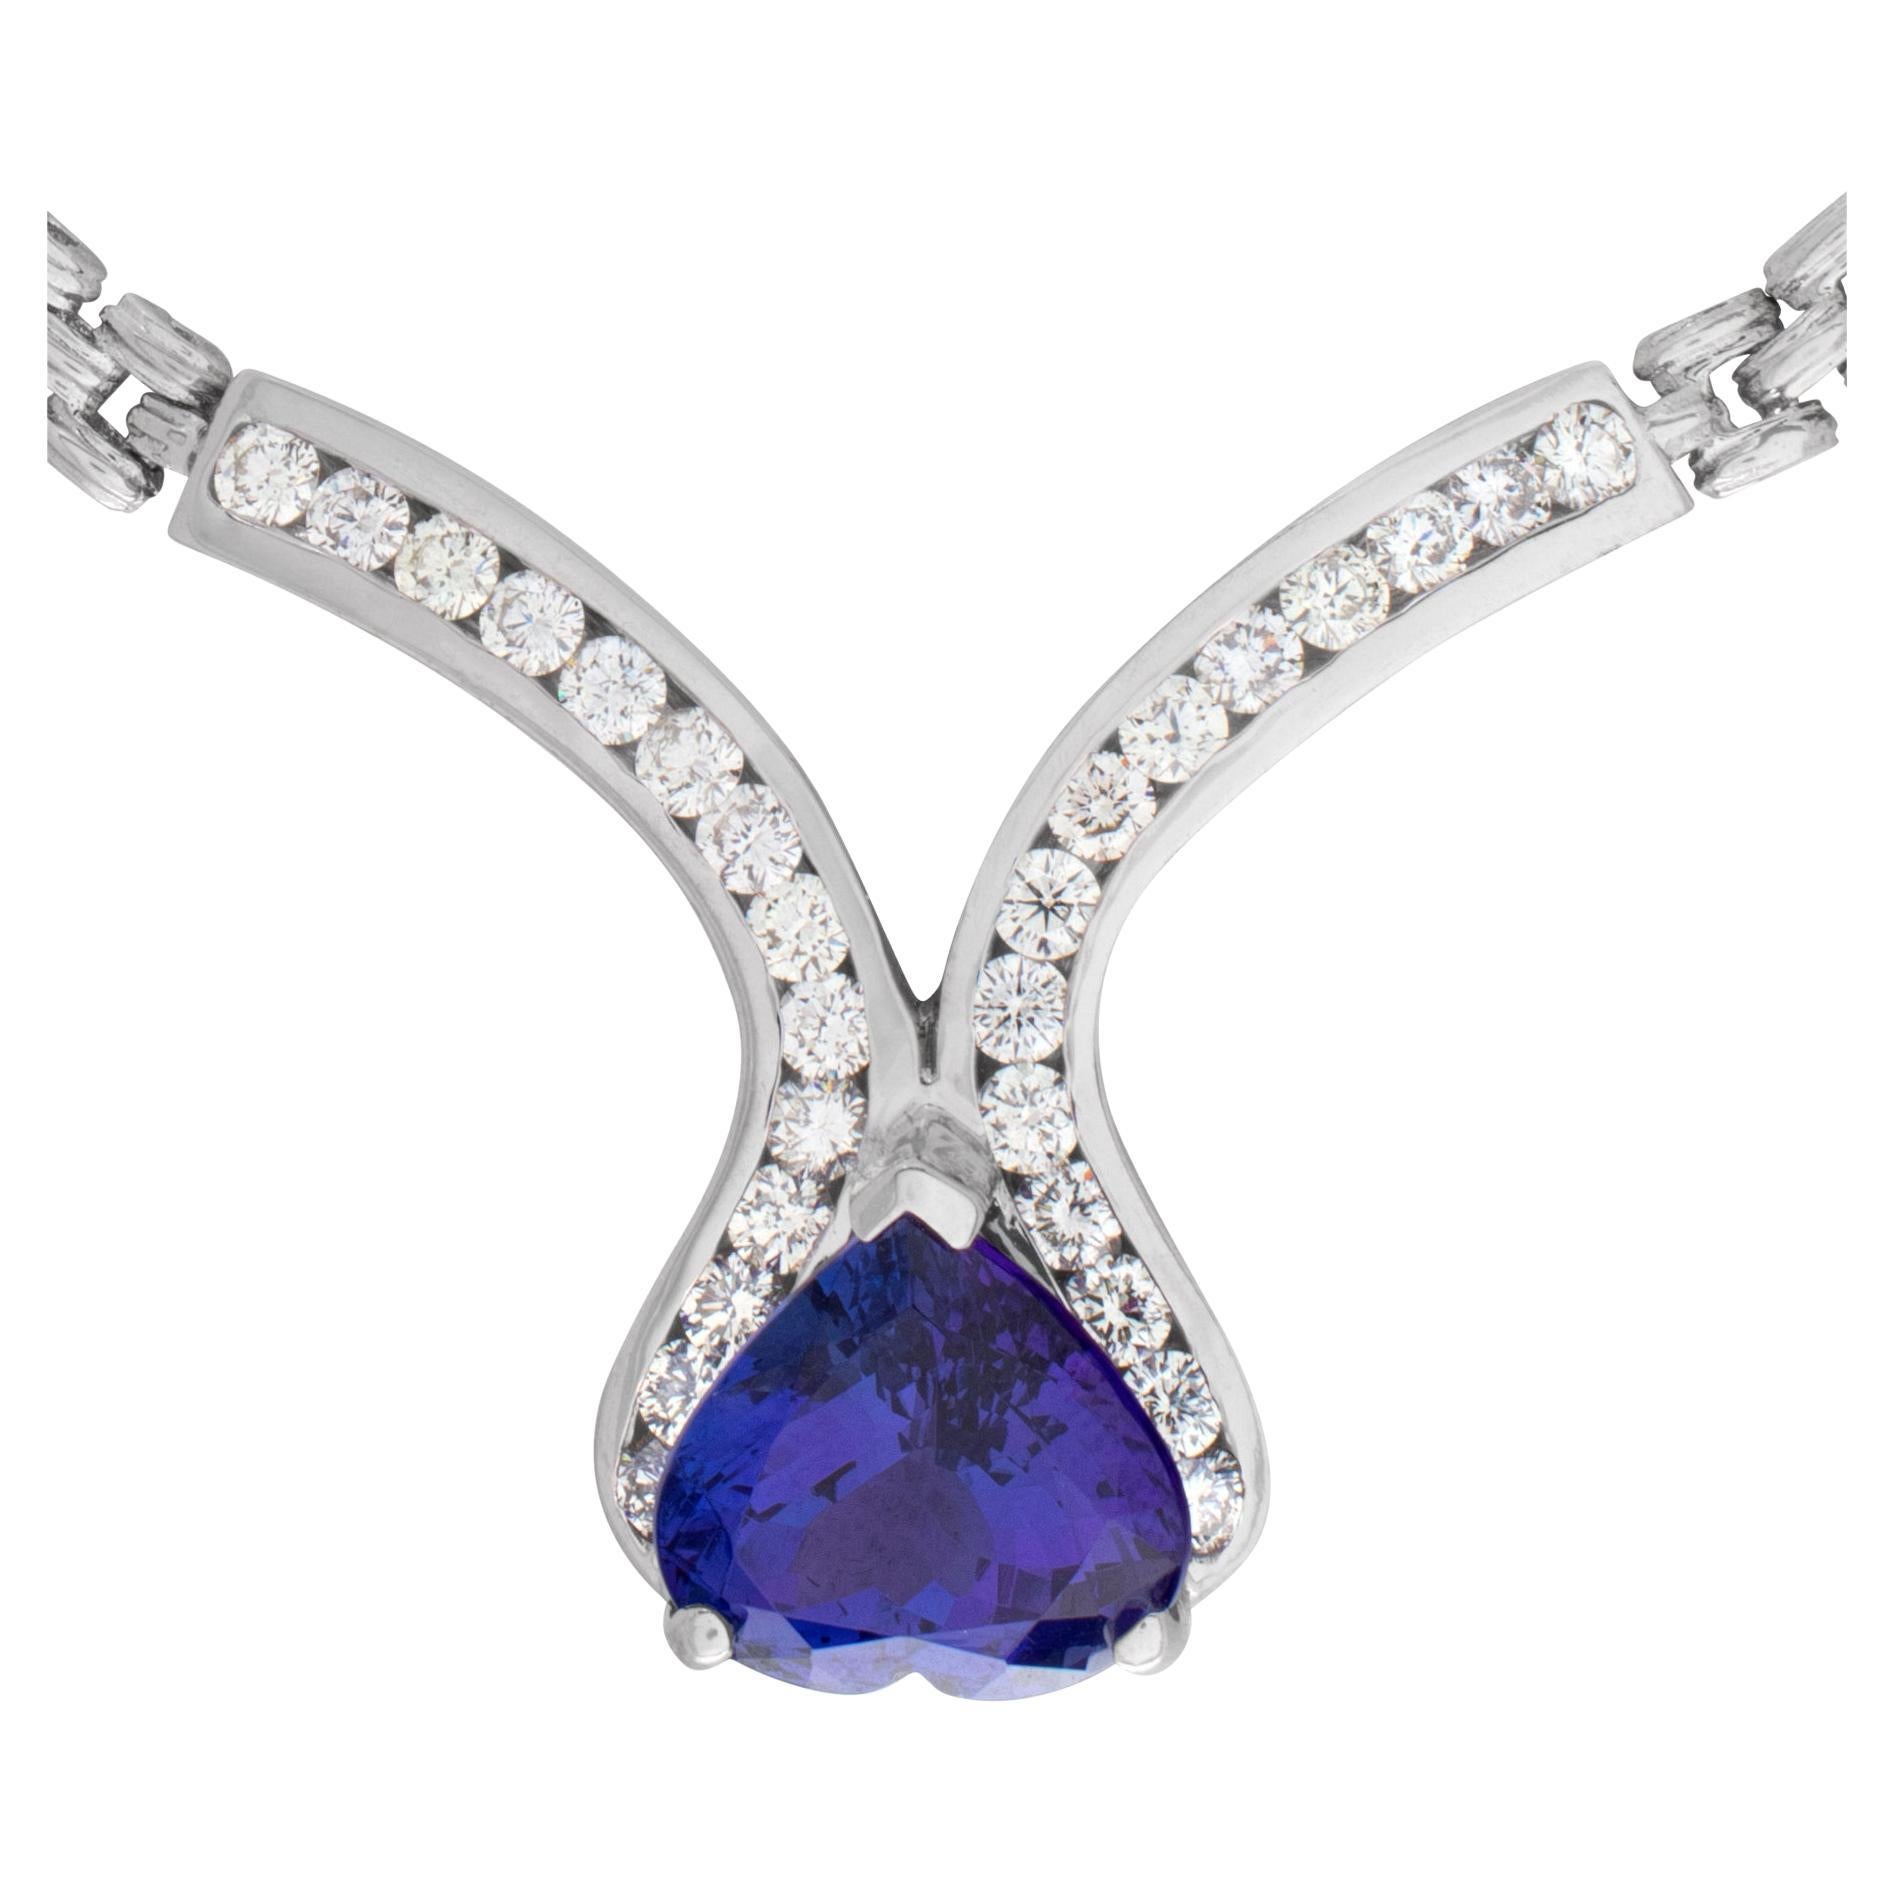 14k White Gold Necklace with a 13.15 Carat Heart Shape Tanzanite Surrounded